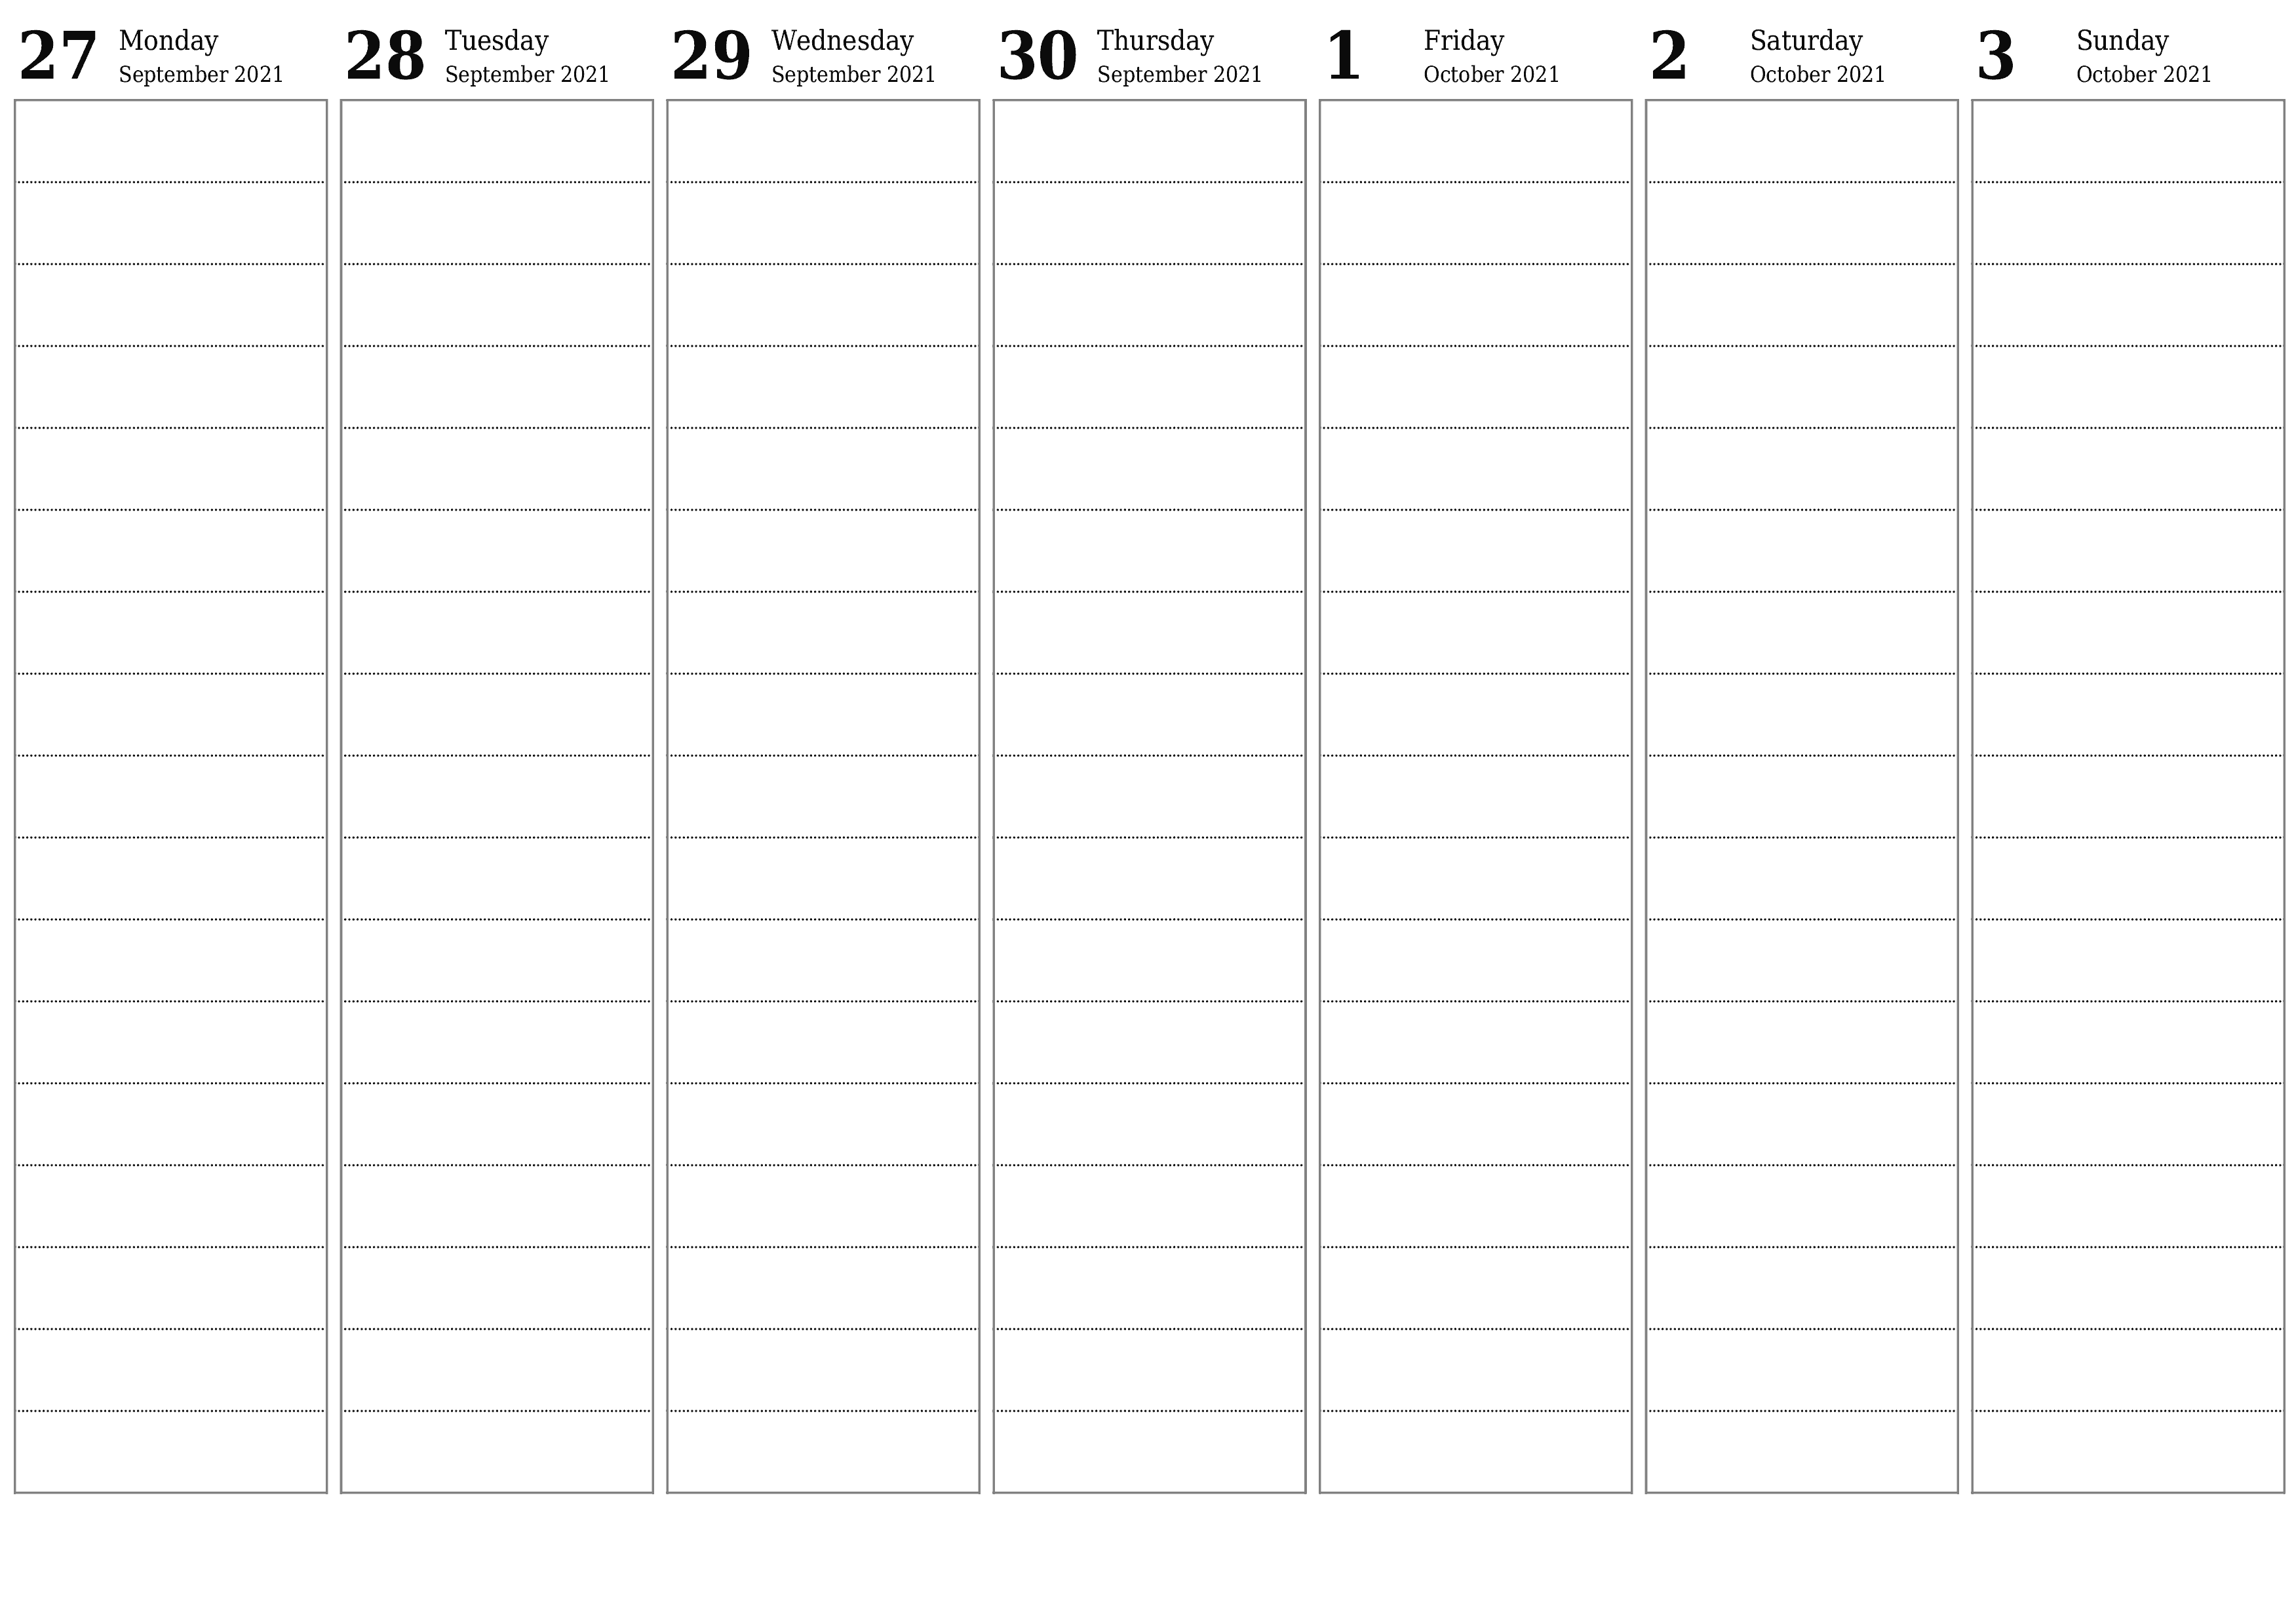 Blank weekly printable calendar and planner for week October 2021 with notes, save and print to PDF PNG English